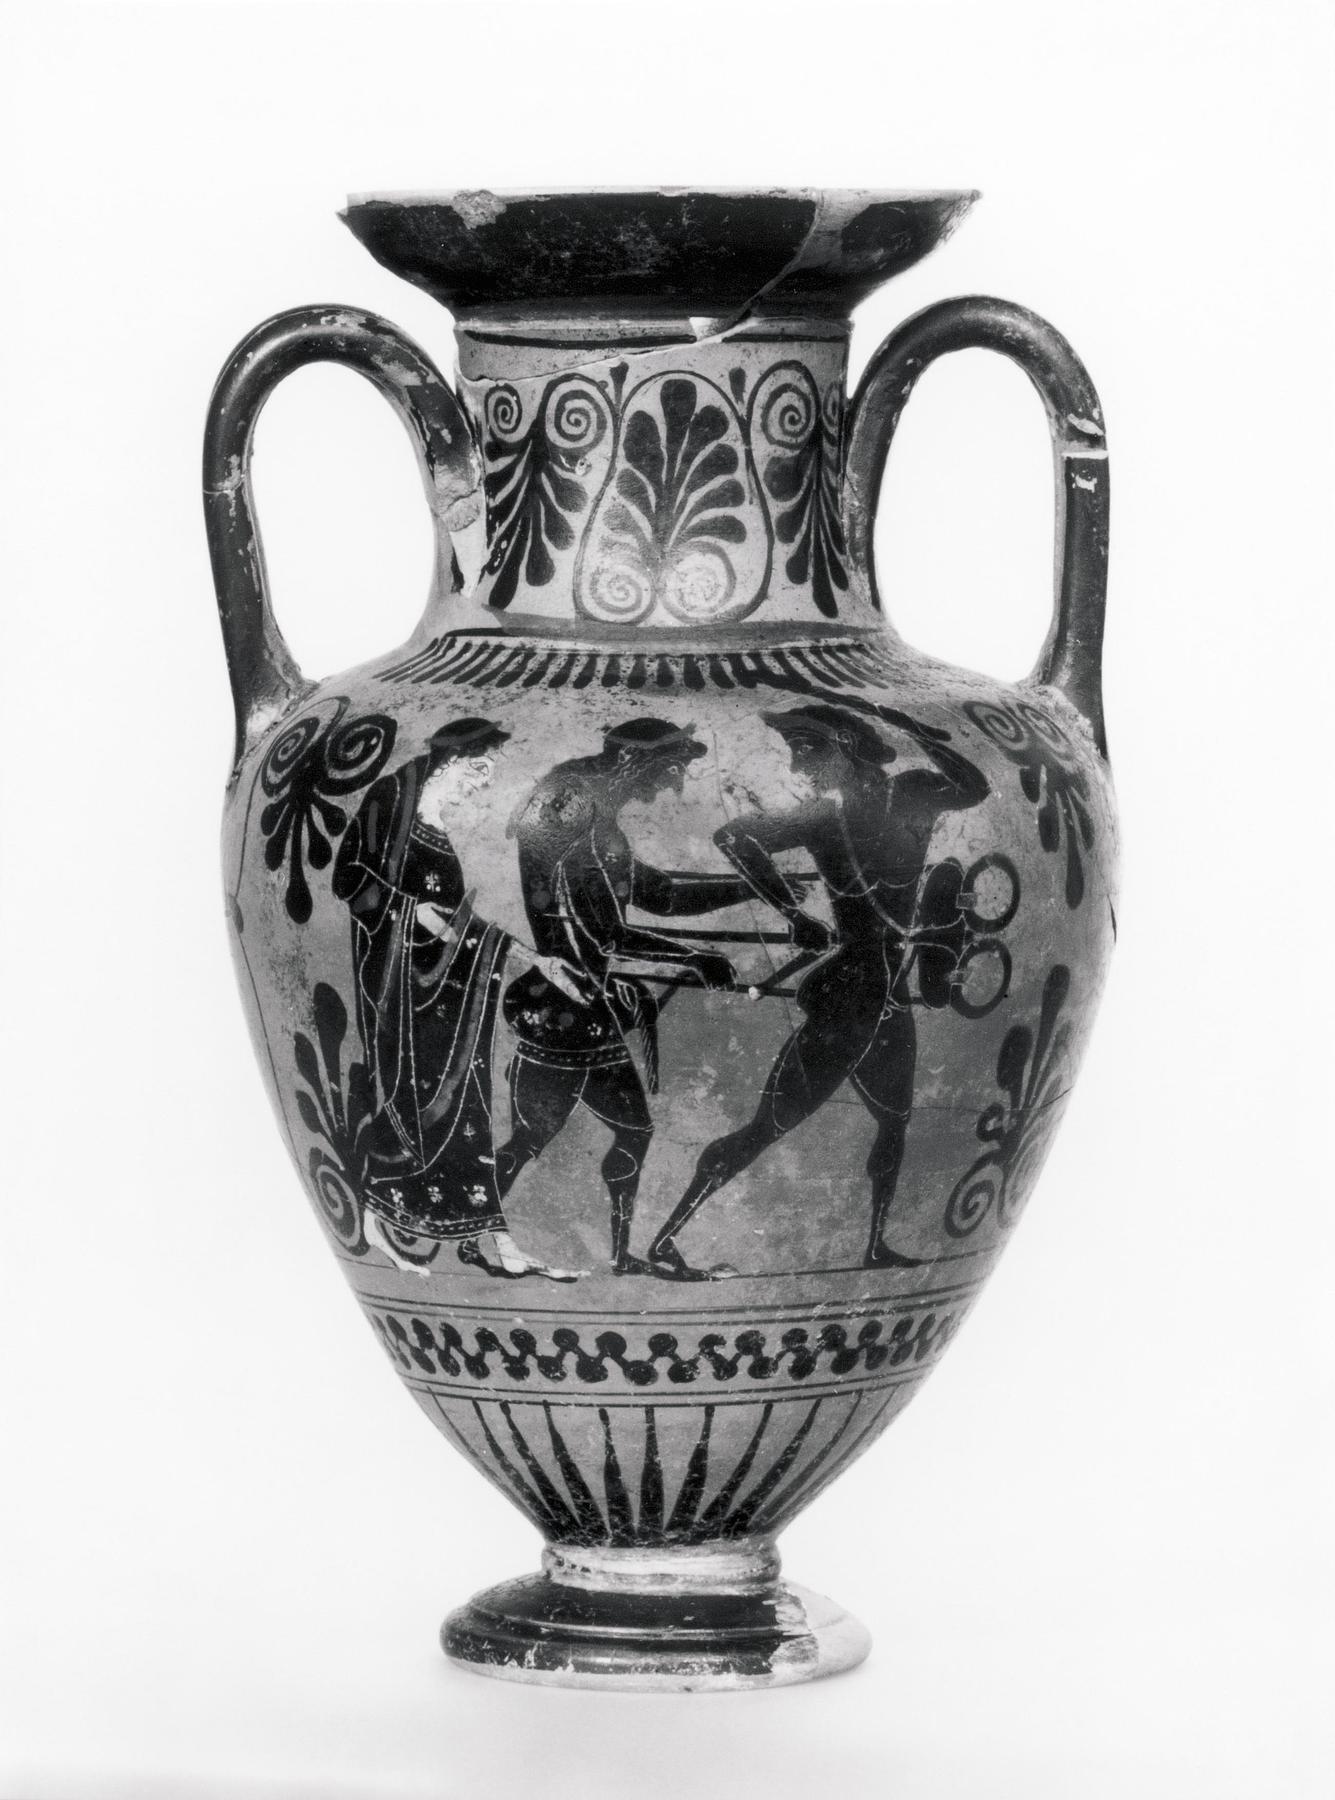 Amphora with Heracles and Apollo struggling for the Delphic tripod (A) and departing warriors (B), H544